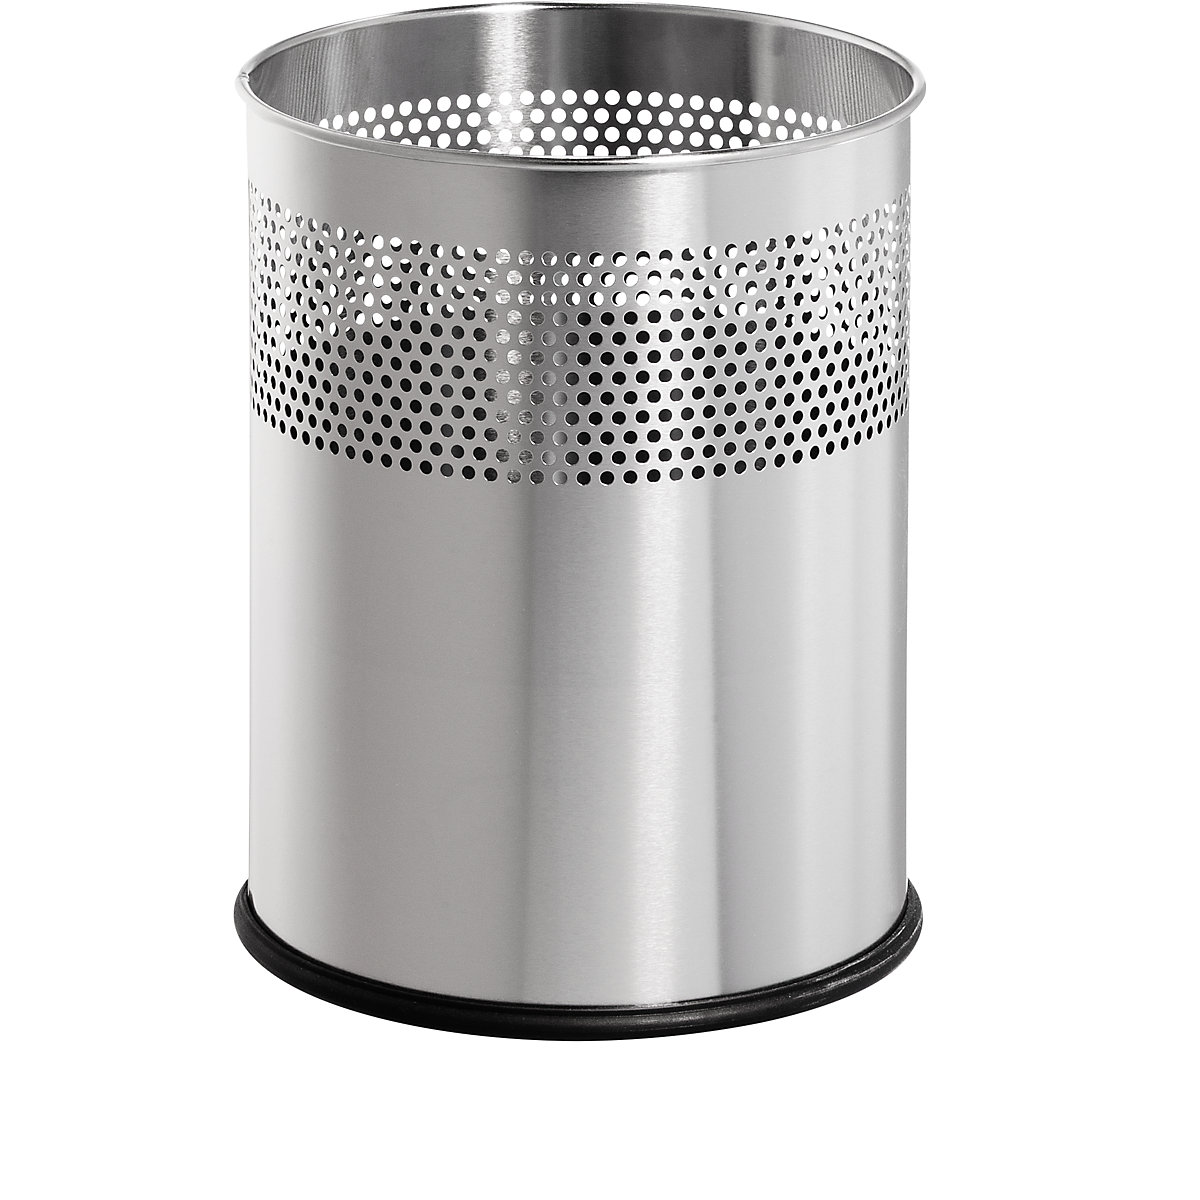 Waste paper bin, stainless steel with perforated pattern – helit